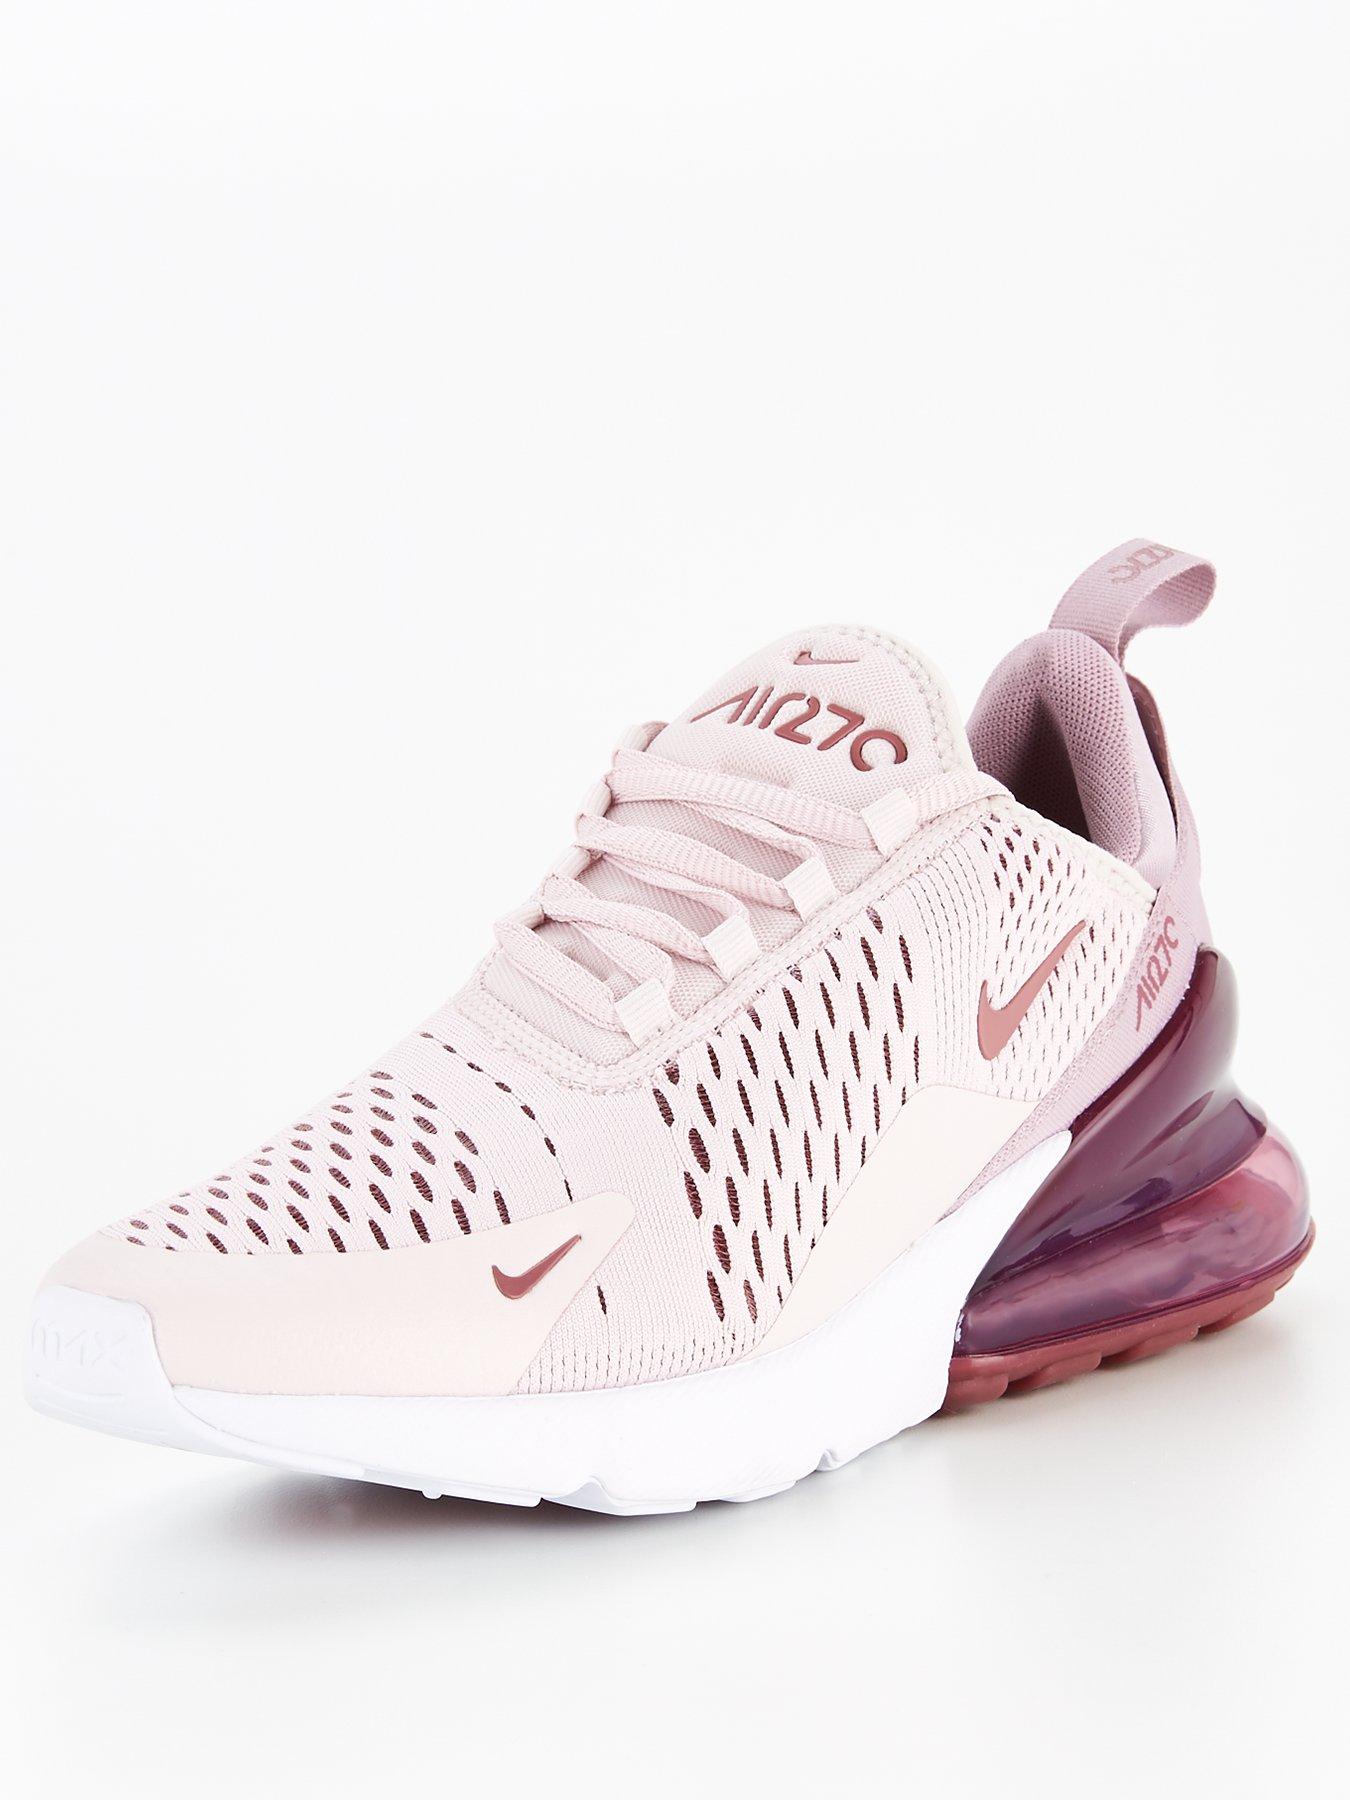 red and pink air max 270